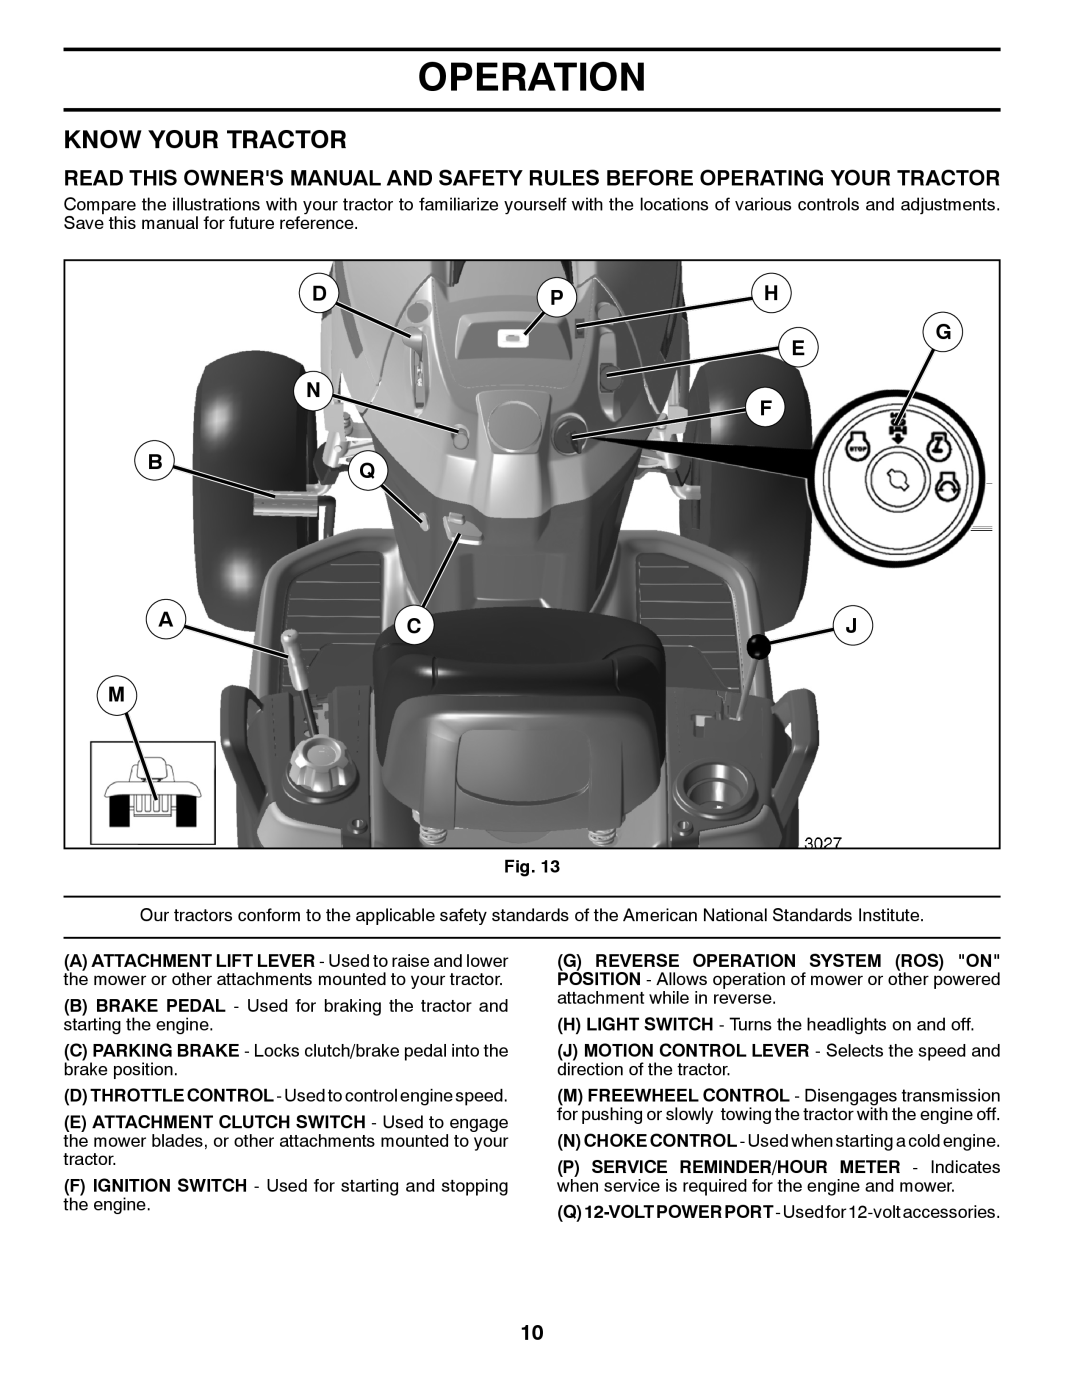 Husqvarna 532 42 57-55, 96045001700, 03002 owner manual Know Your Tractor, Bq Acj M, Operation 